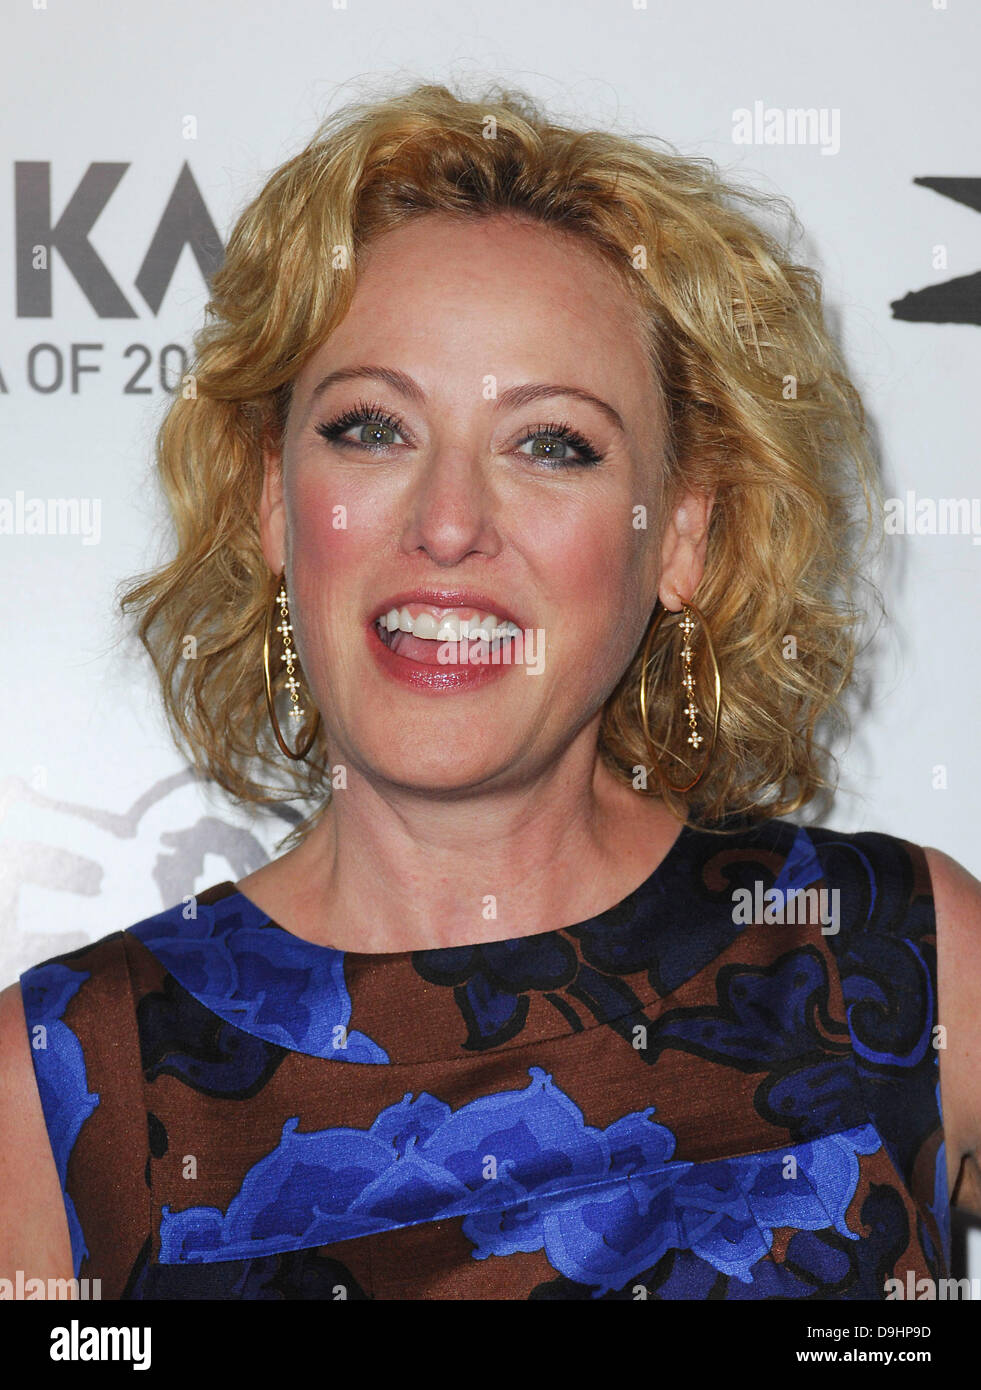 Virginia Madsen  Los Angeles Premiere of 'Super' held at The Egyptian Theatre Hollywood, California - 21.03.11 Stock Photo